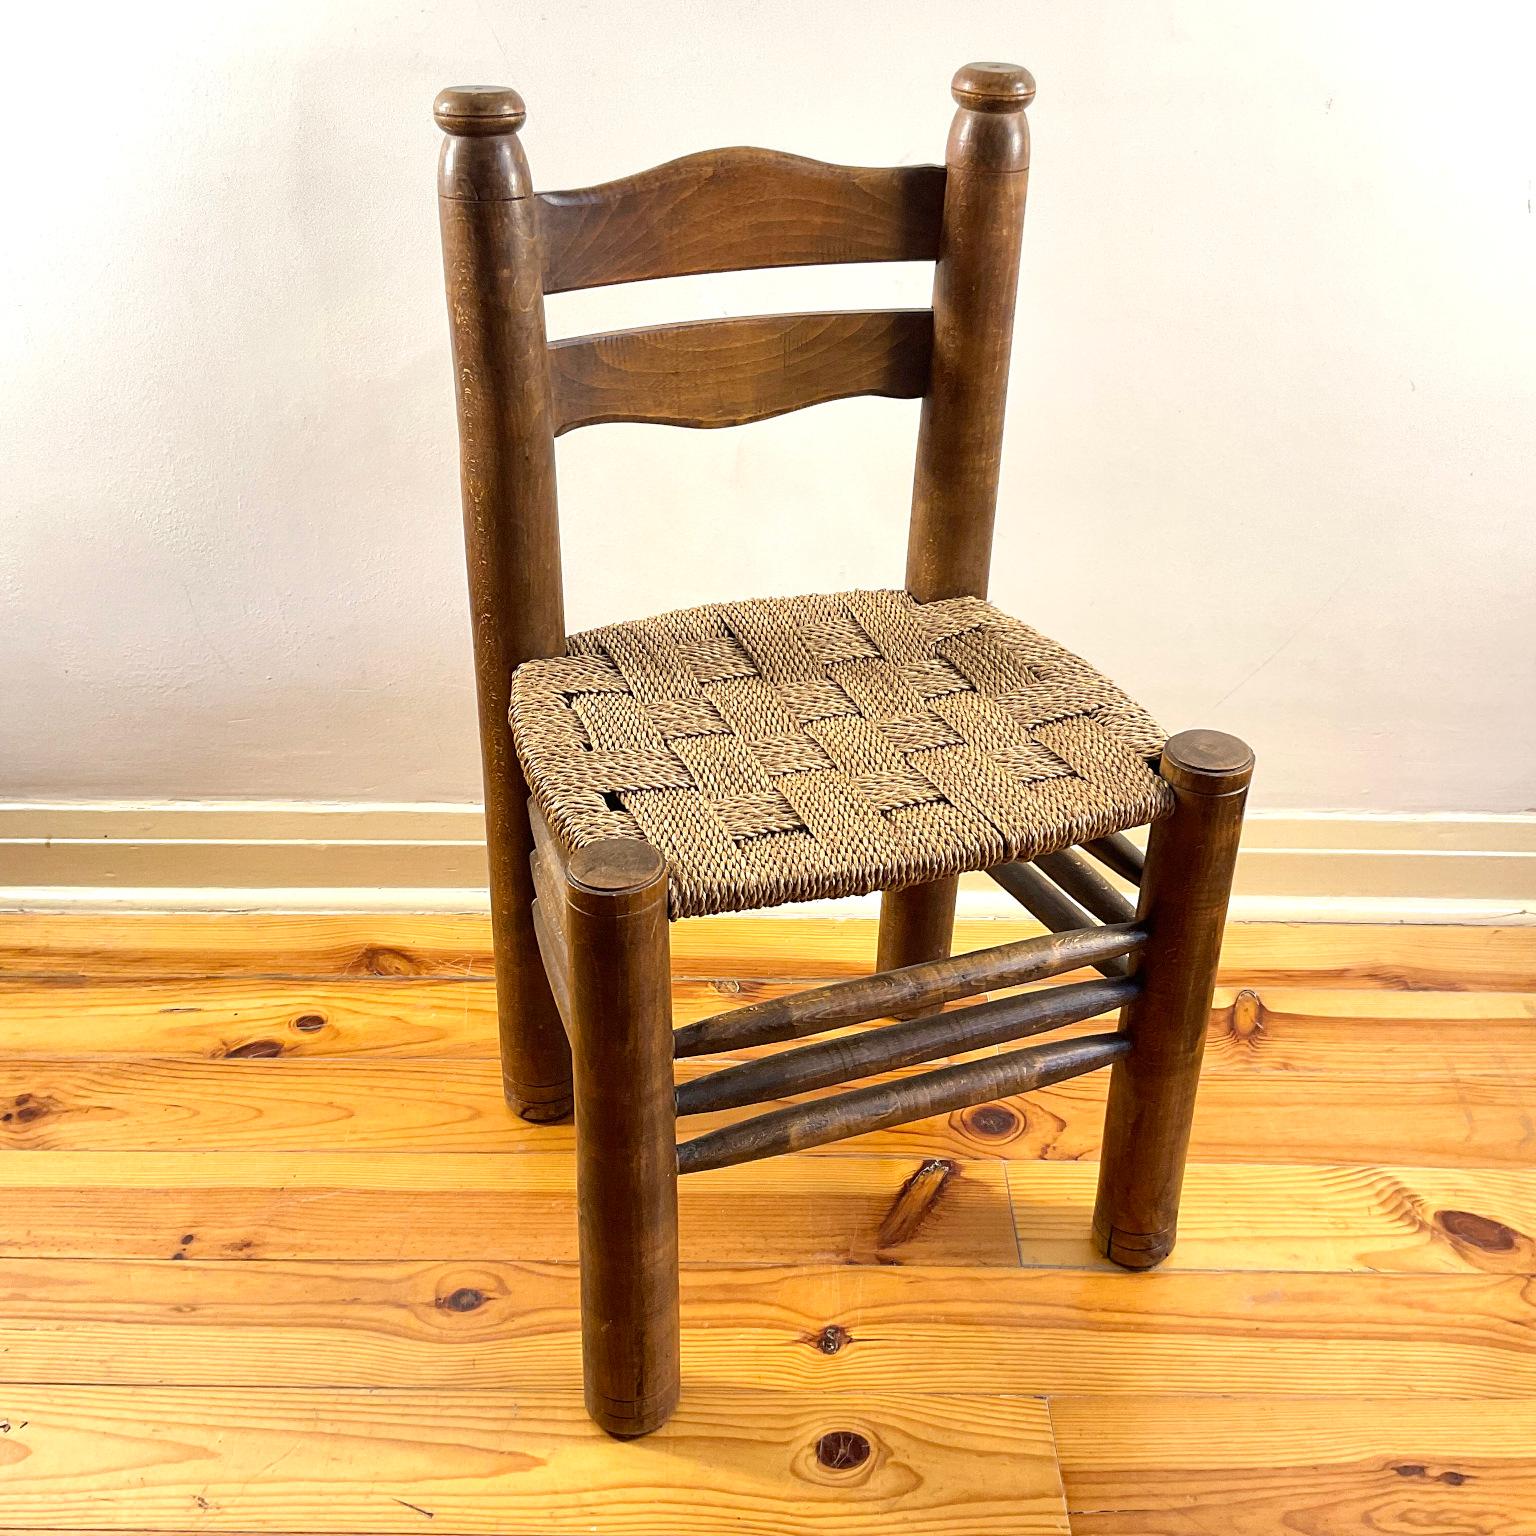 Single rustic dining chair by Charles Dudouyt with a natural rush weave.

